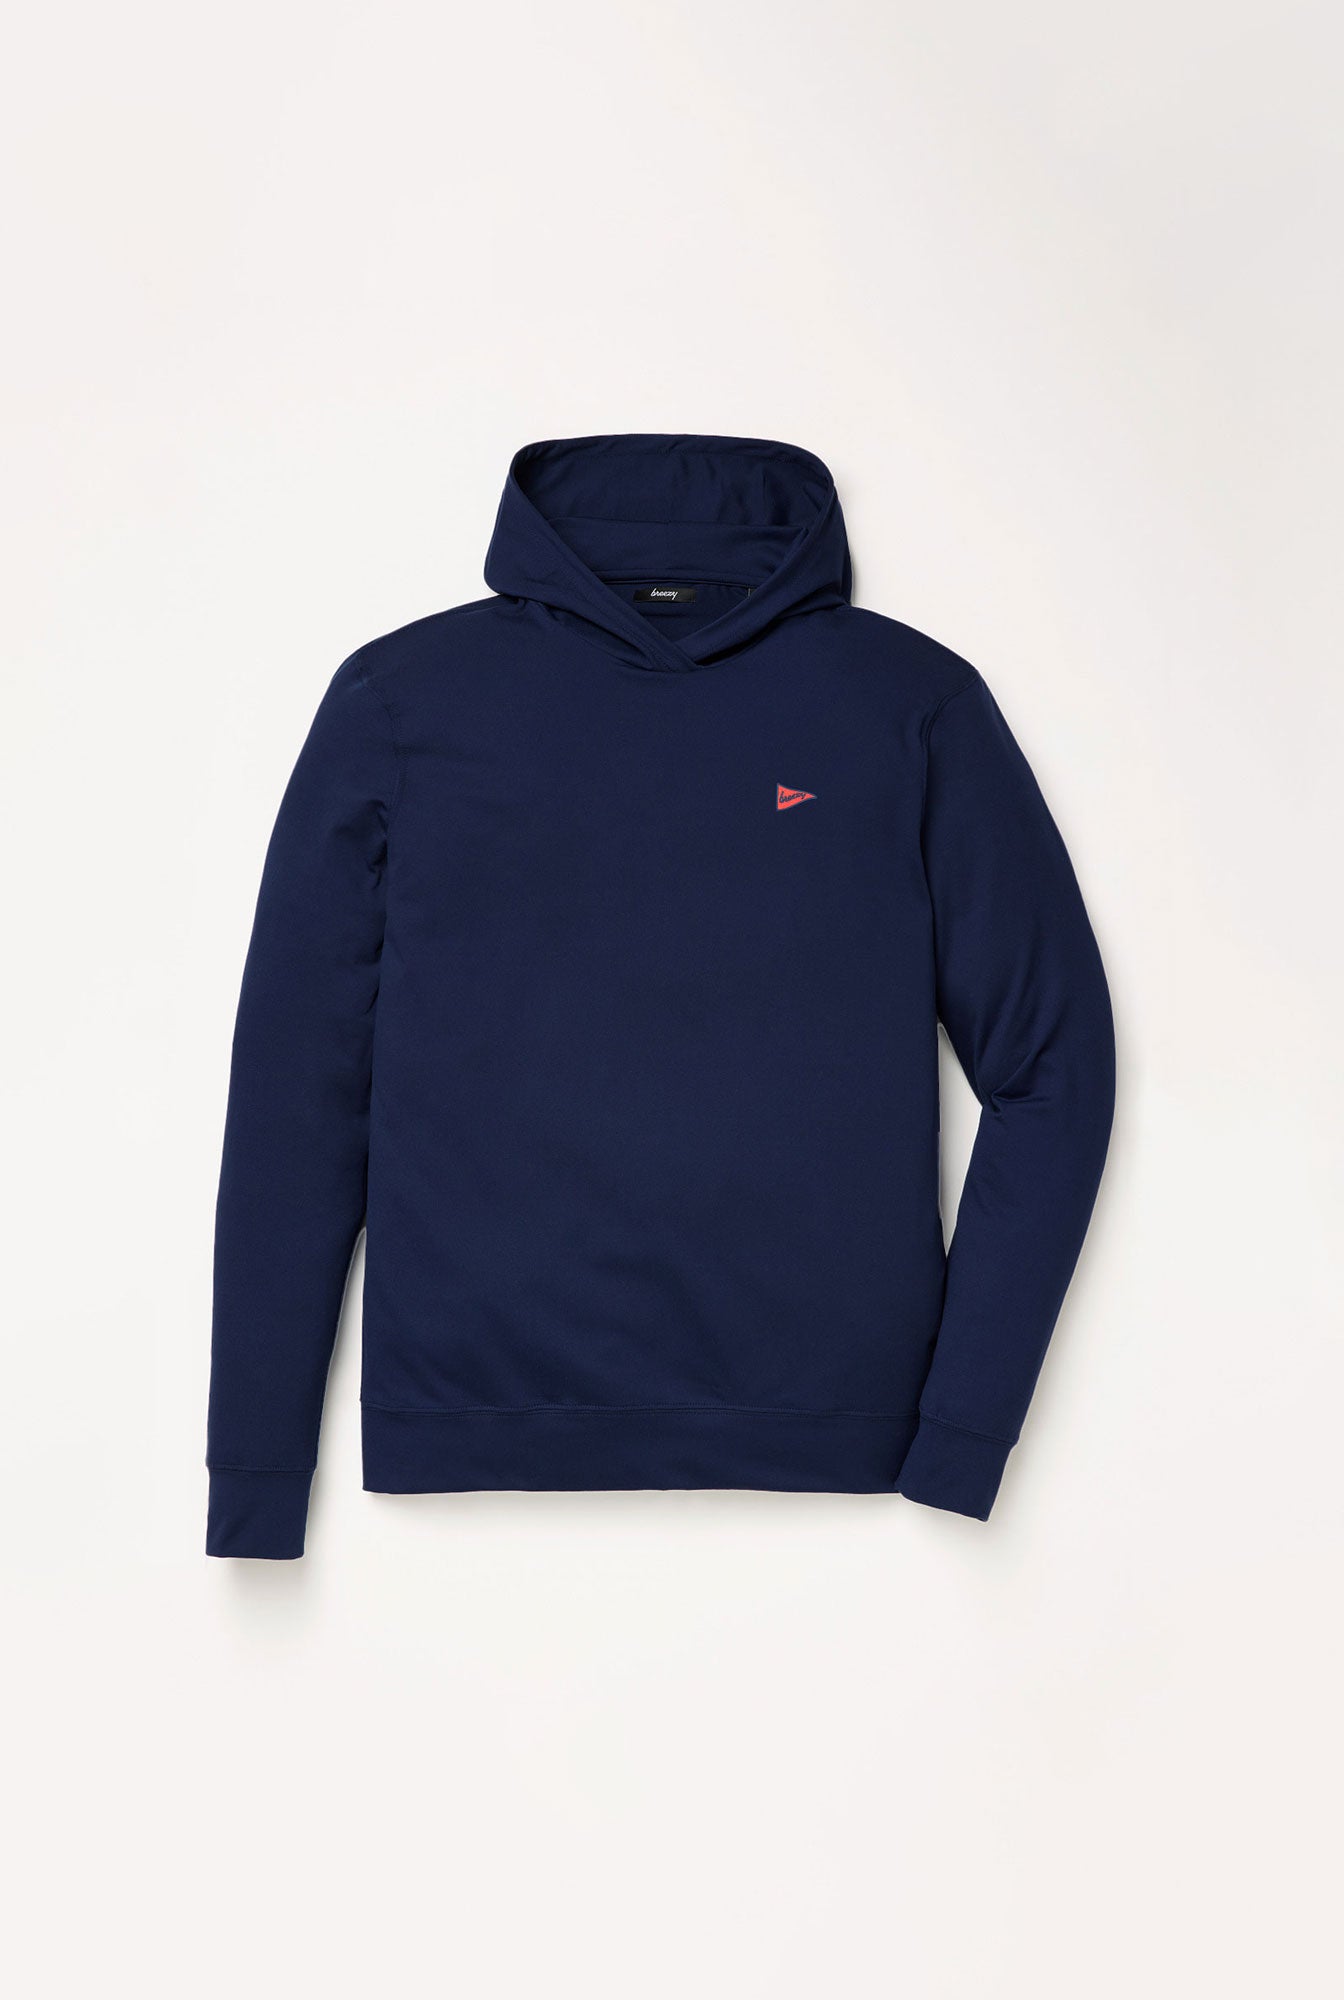 The Scratch Hoodie - Navy